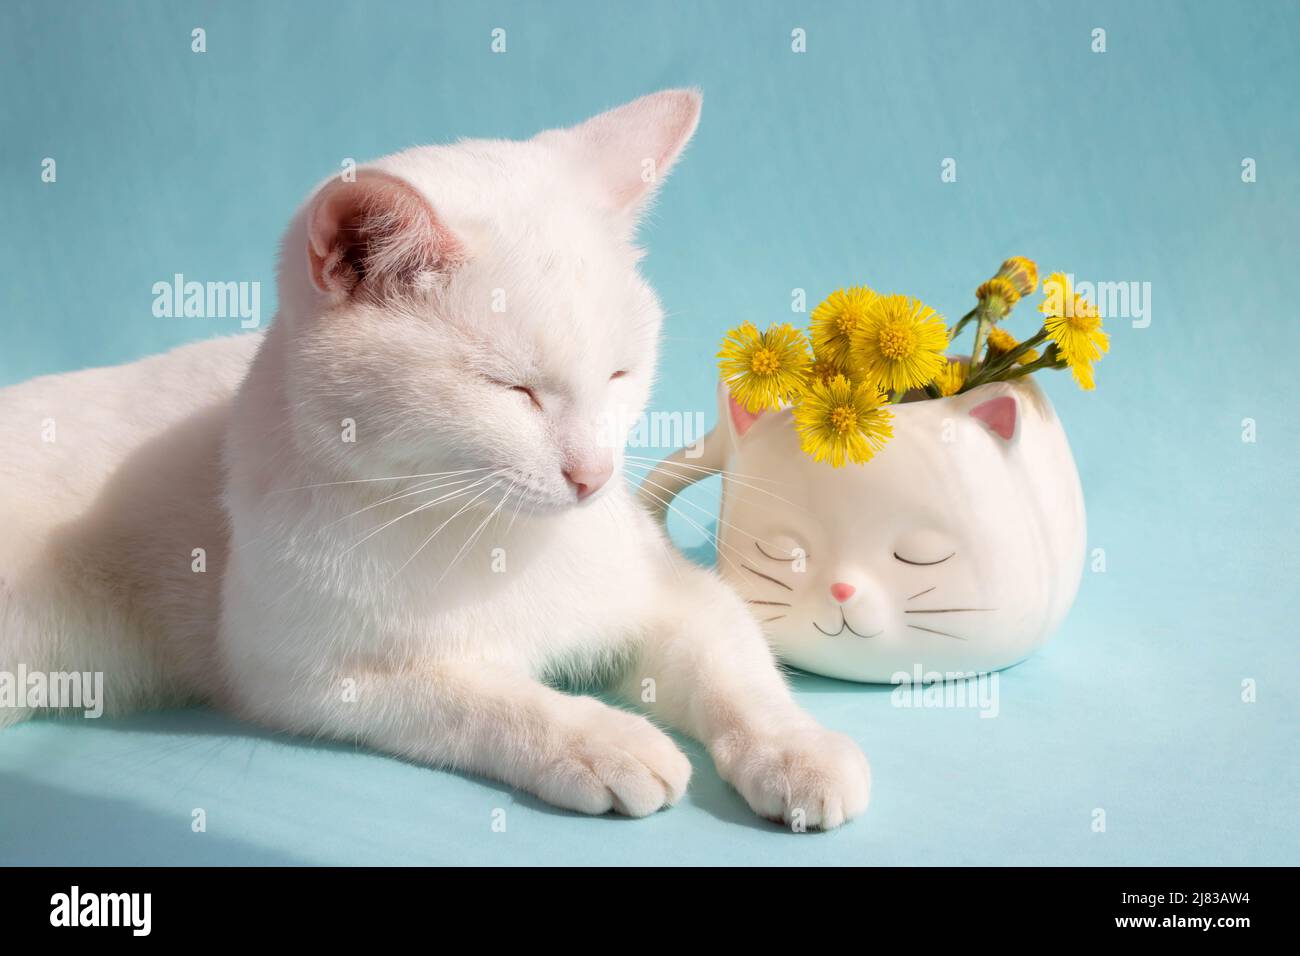 A dozing white cat with mother-and-stepmother flowers in a white cat-shaped cup on a blue background. Good cozy morning Stock Photo